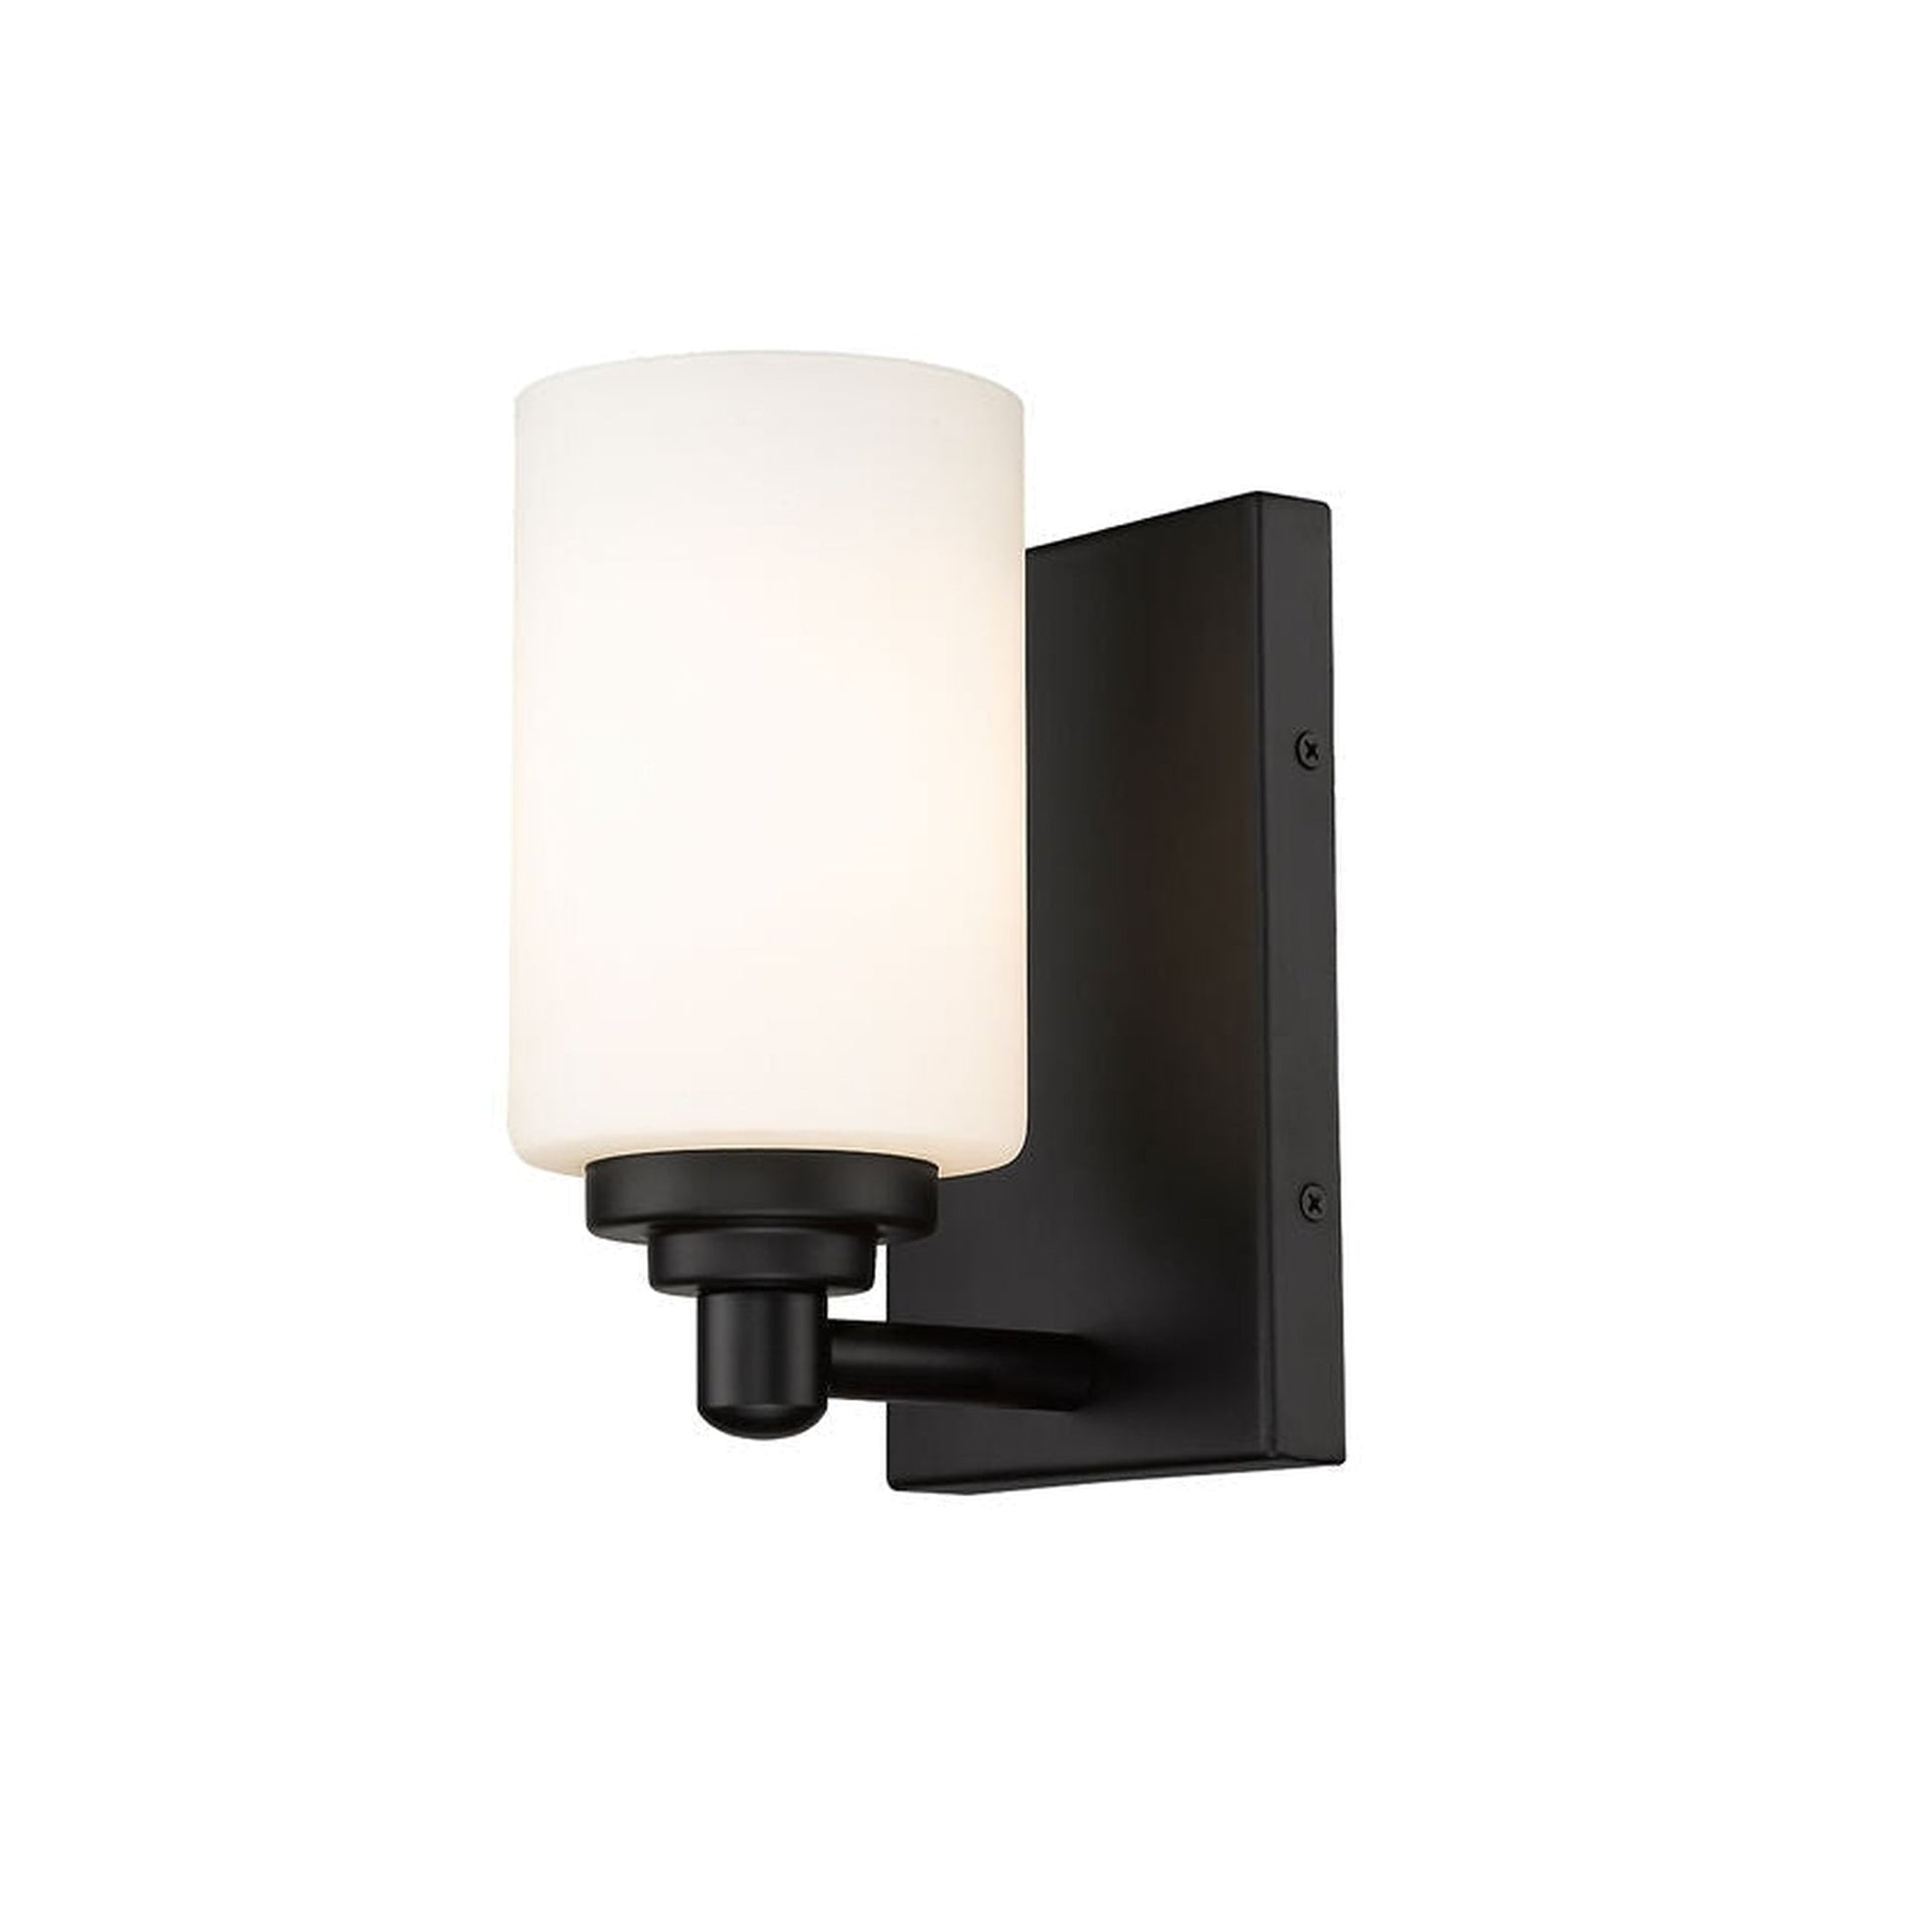 Z-Lite Soledad 5" 1-Light Matte Black Wall Sconce With White Glass Shade